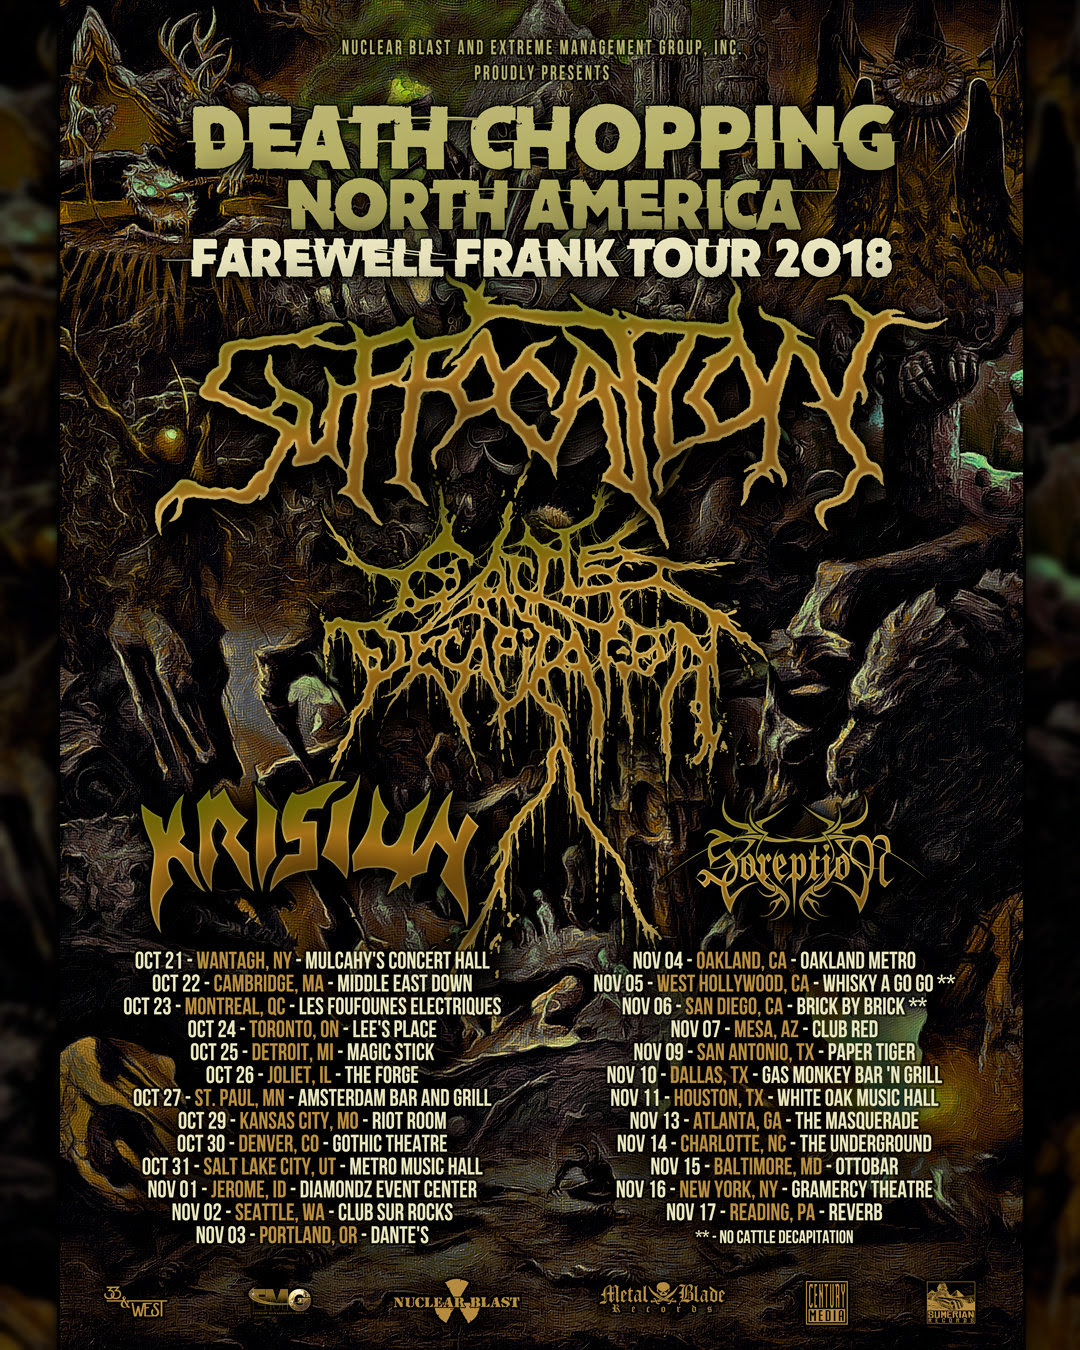 SUFFOCATION announce Frank Mullen Farewell Tour for North America